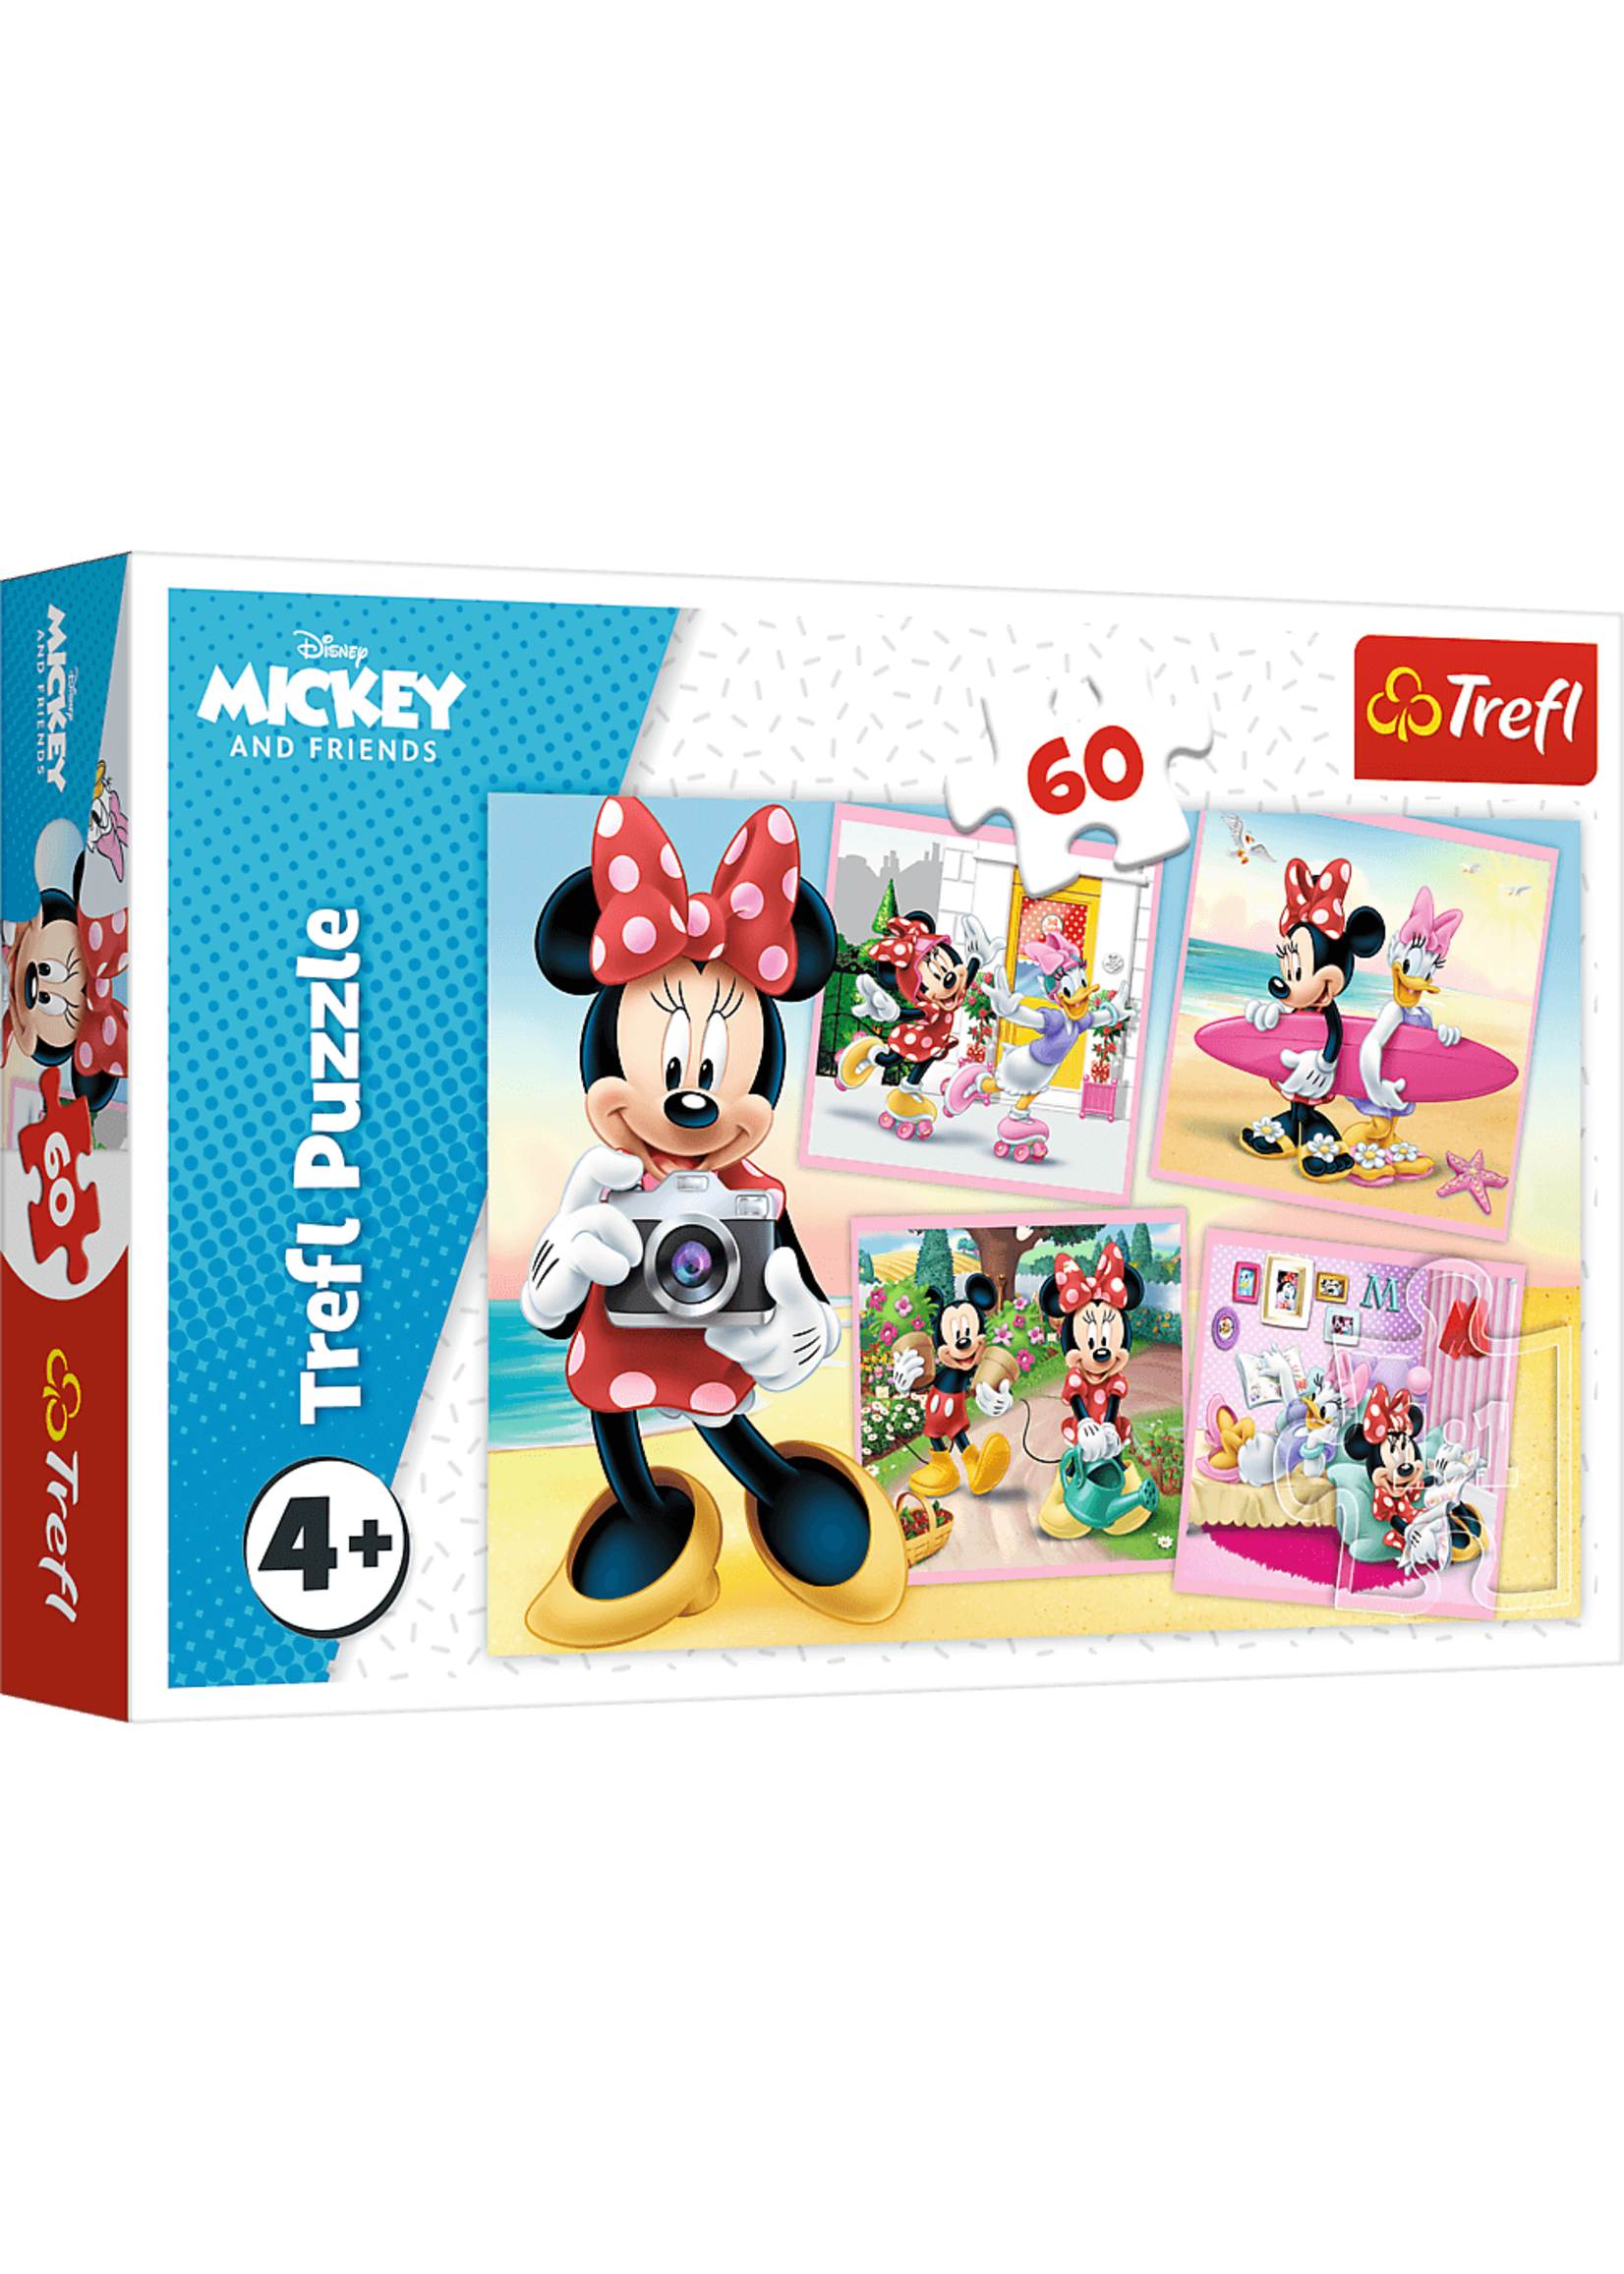 Disney Minnie Mouse puzzle from Disney